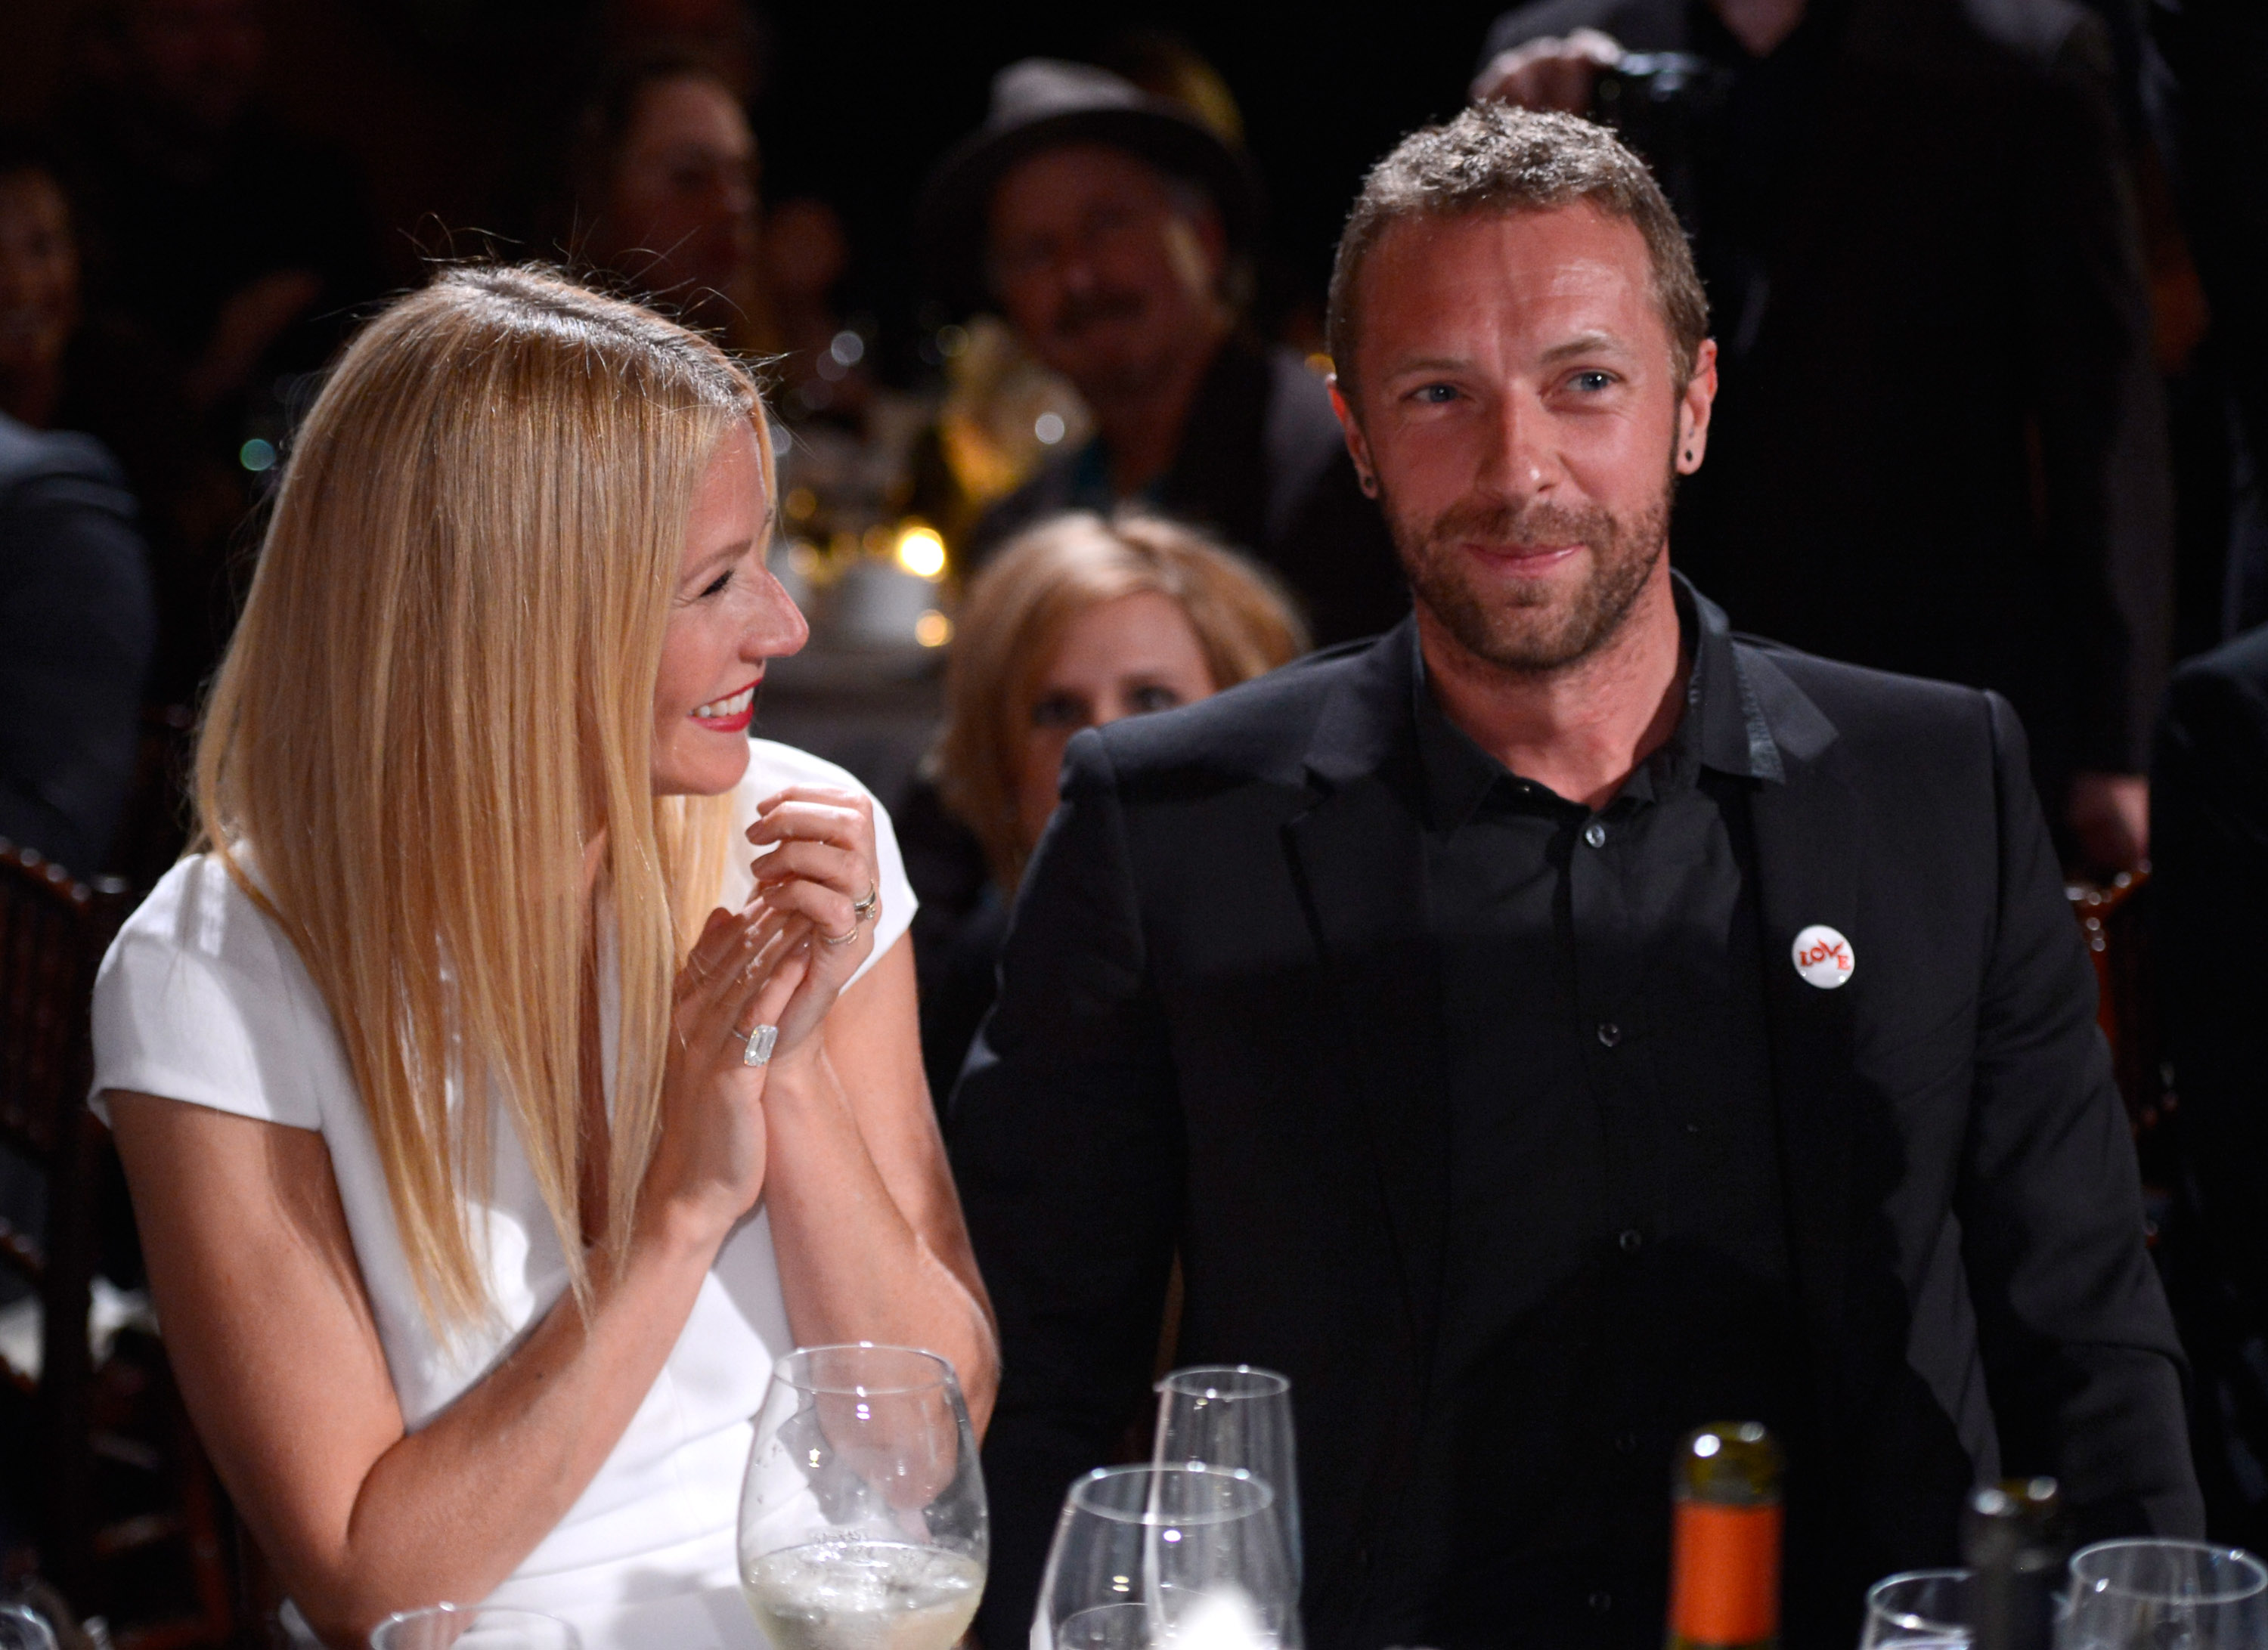 Gwyneth Paltrow and Chris Martin at Montage Beverly Hills on January 11, 2014 in Beverly Hills, California.